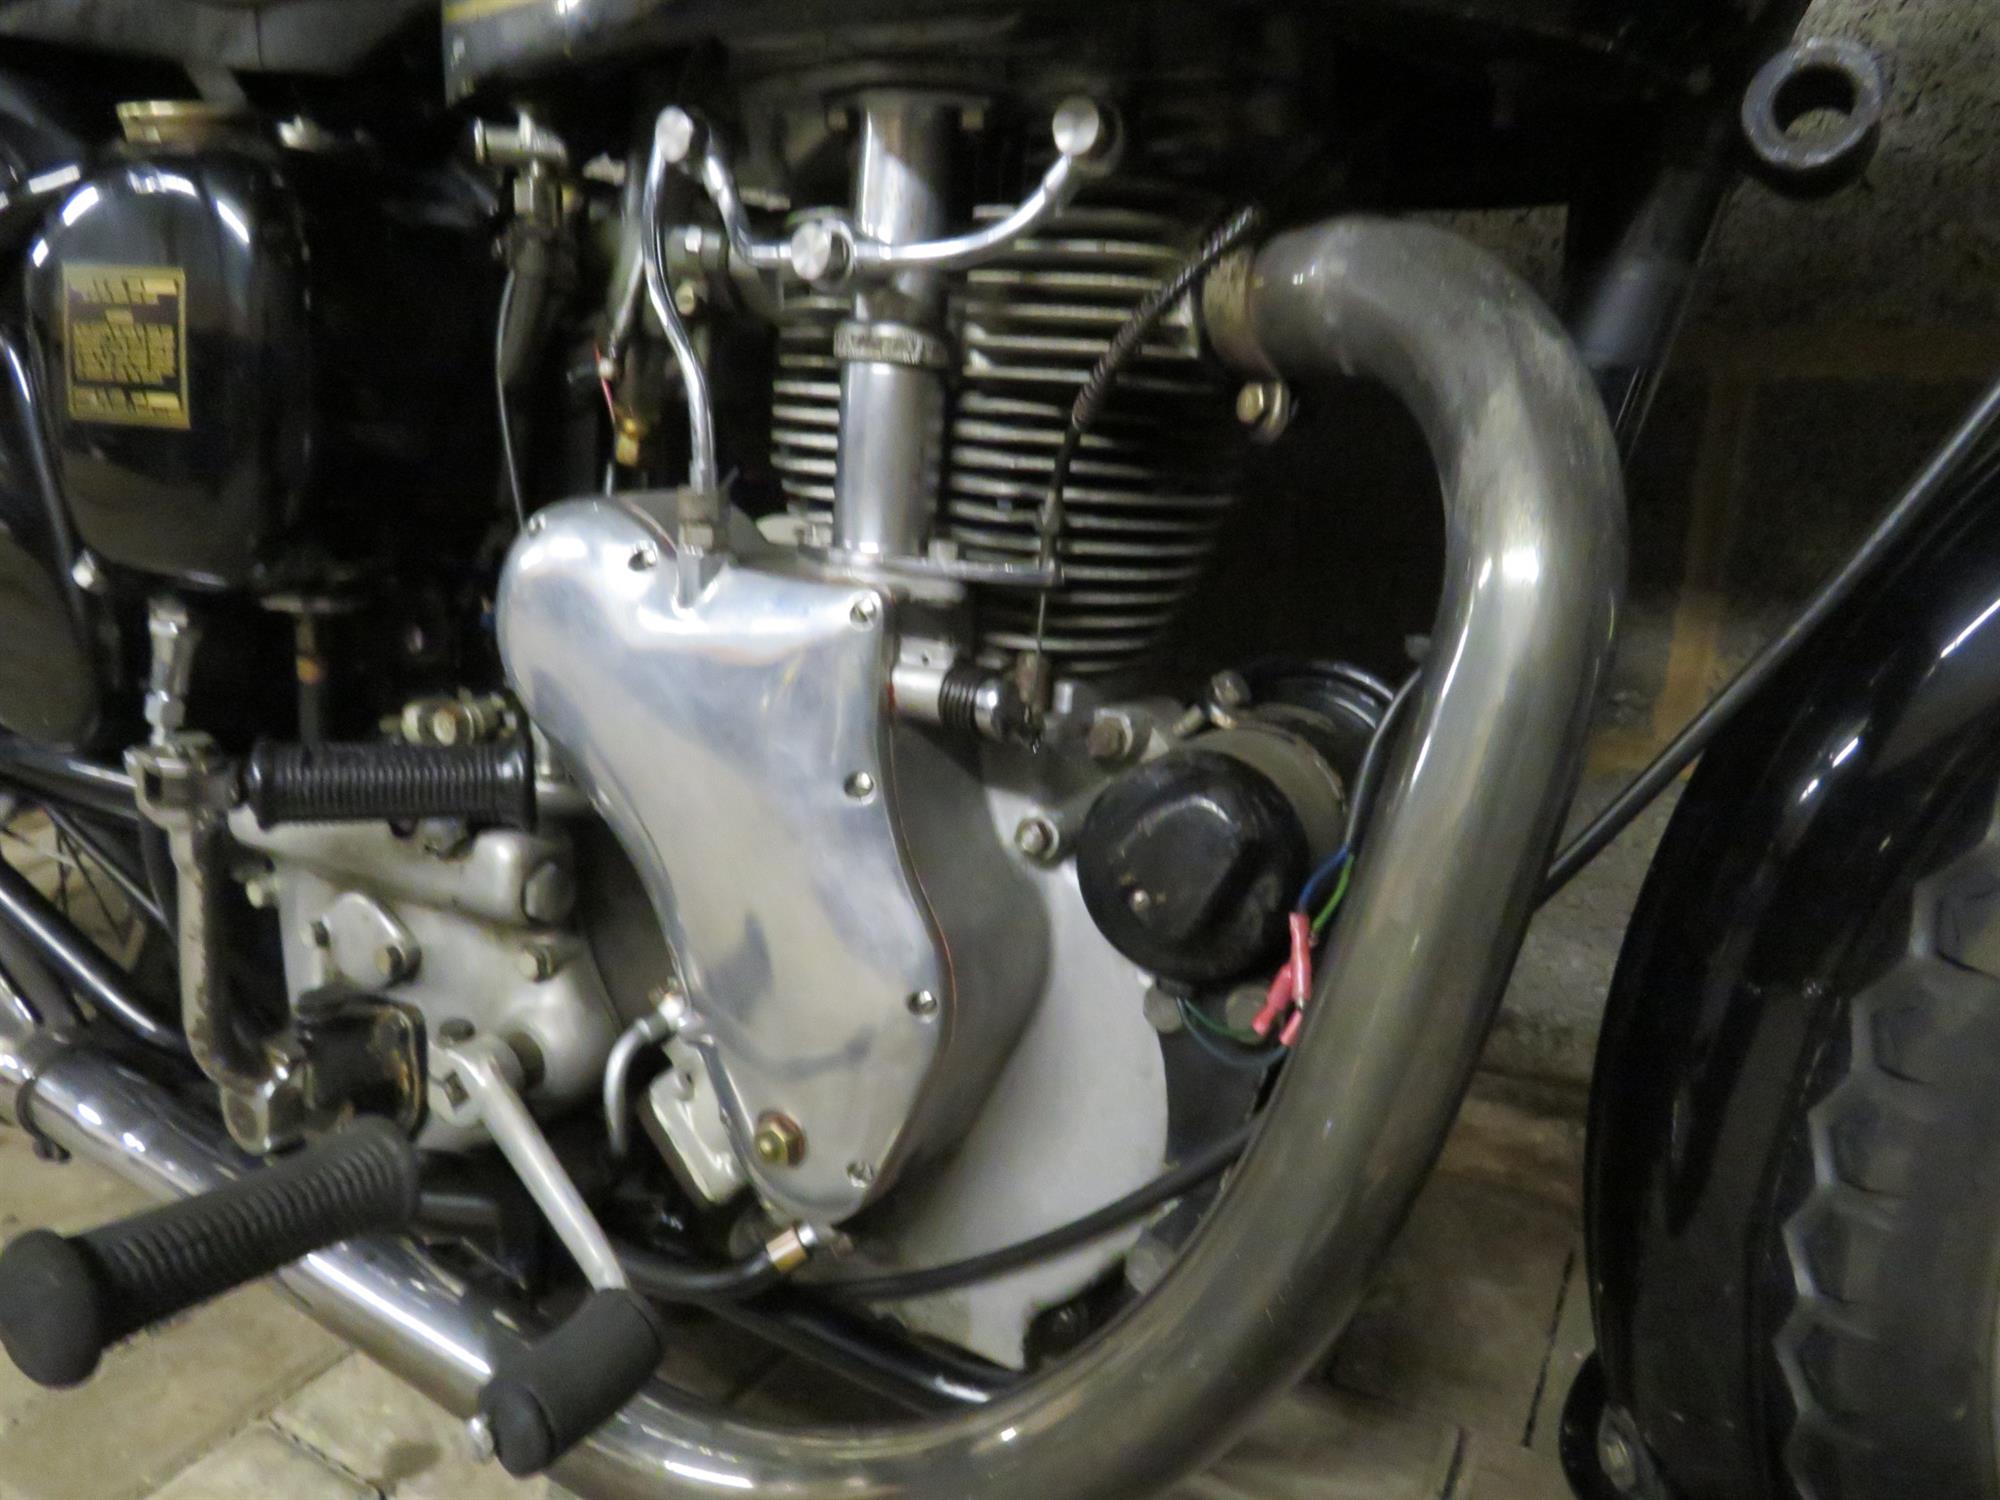 1959 Velocette MSS 500cc - Image 5 of 10